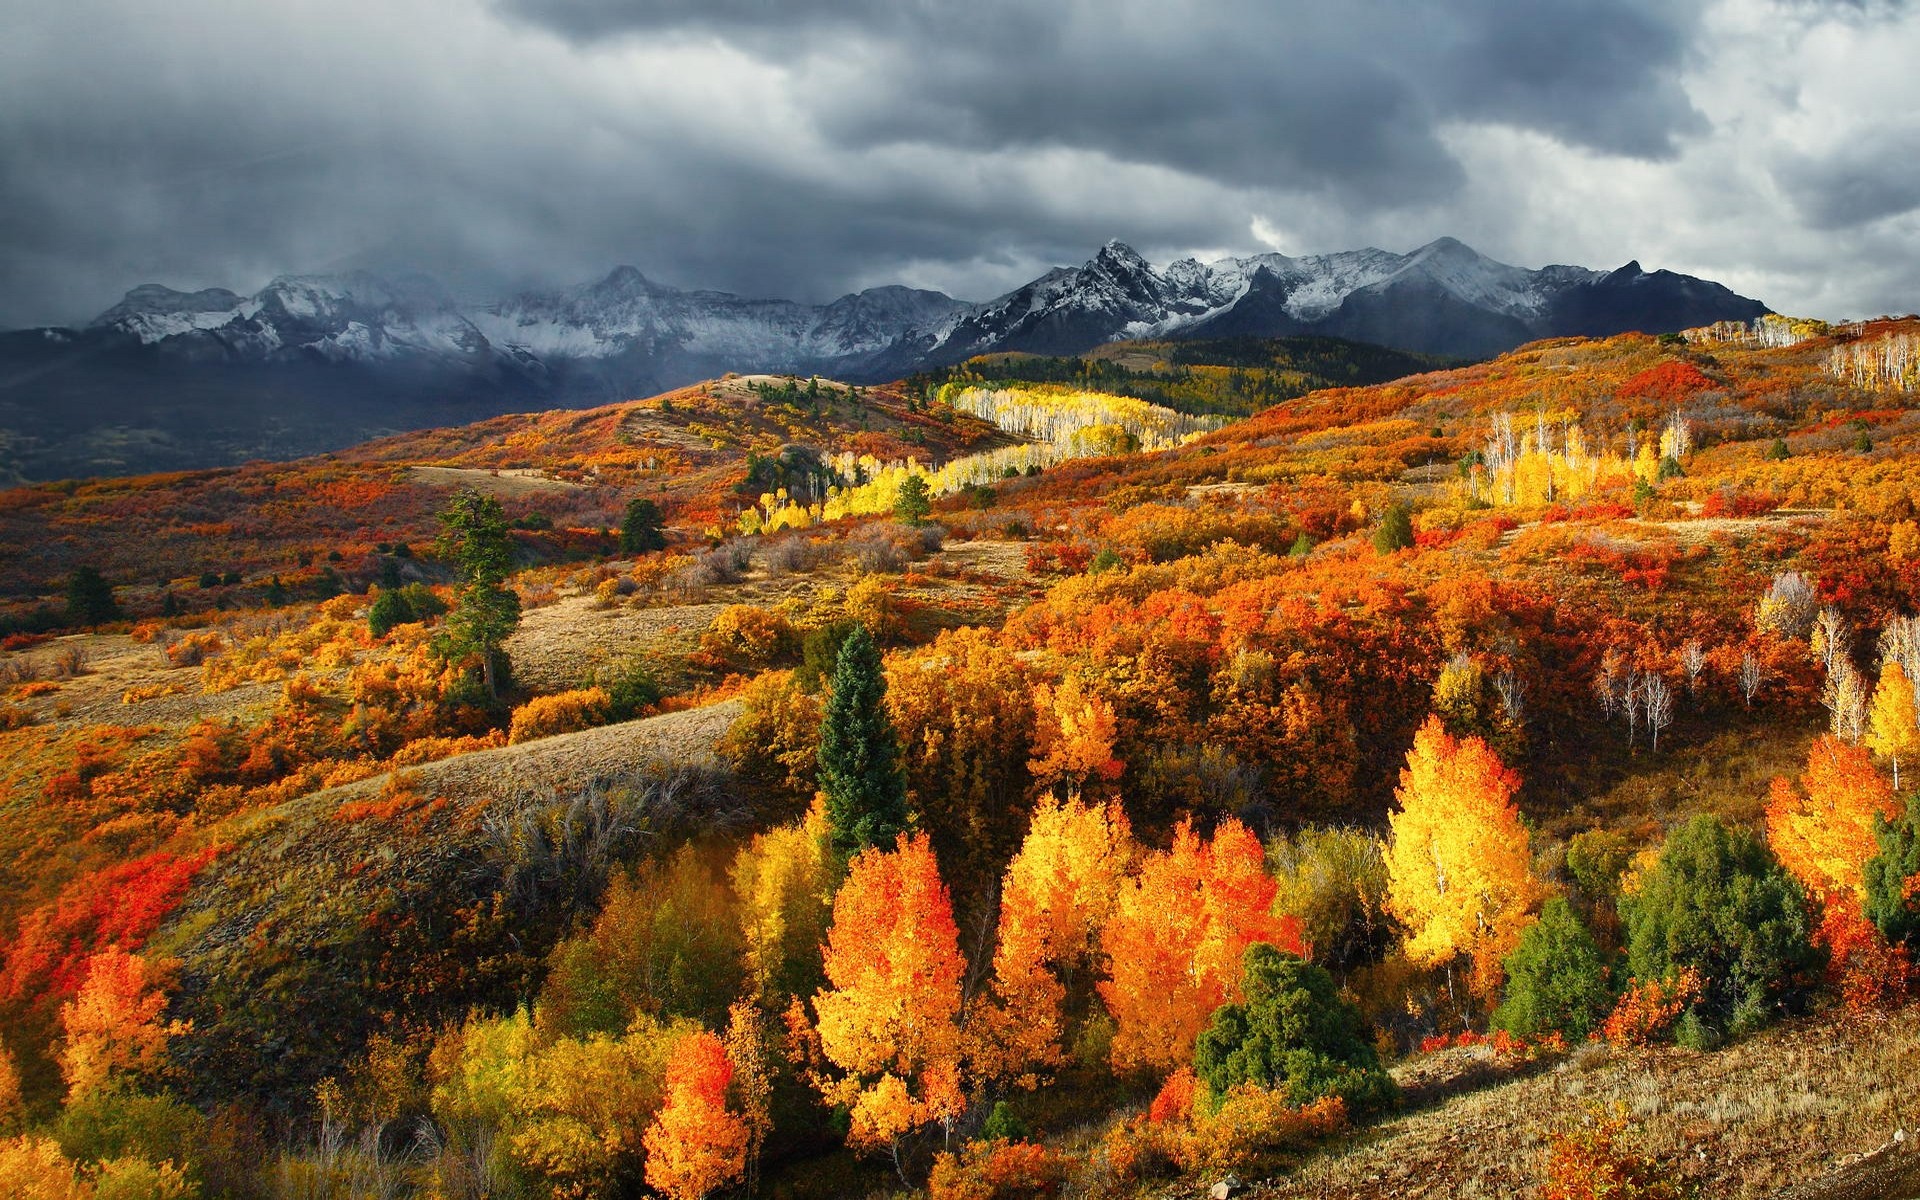 General 1920x1200 nature landscape fall forest mountains Colorado snowy peak clouds colorful USA